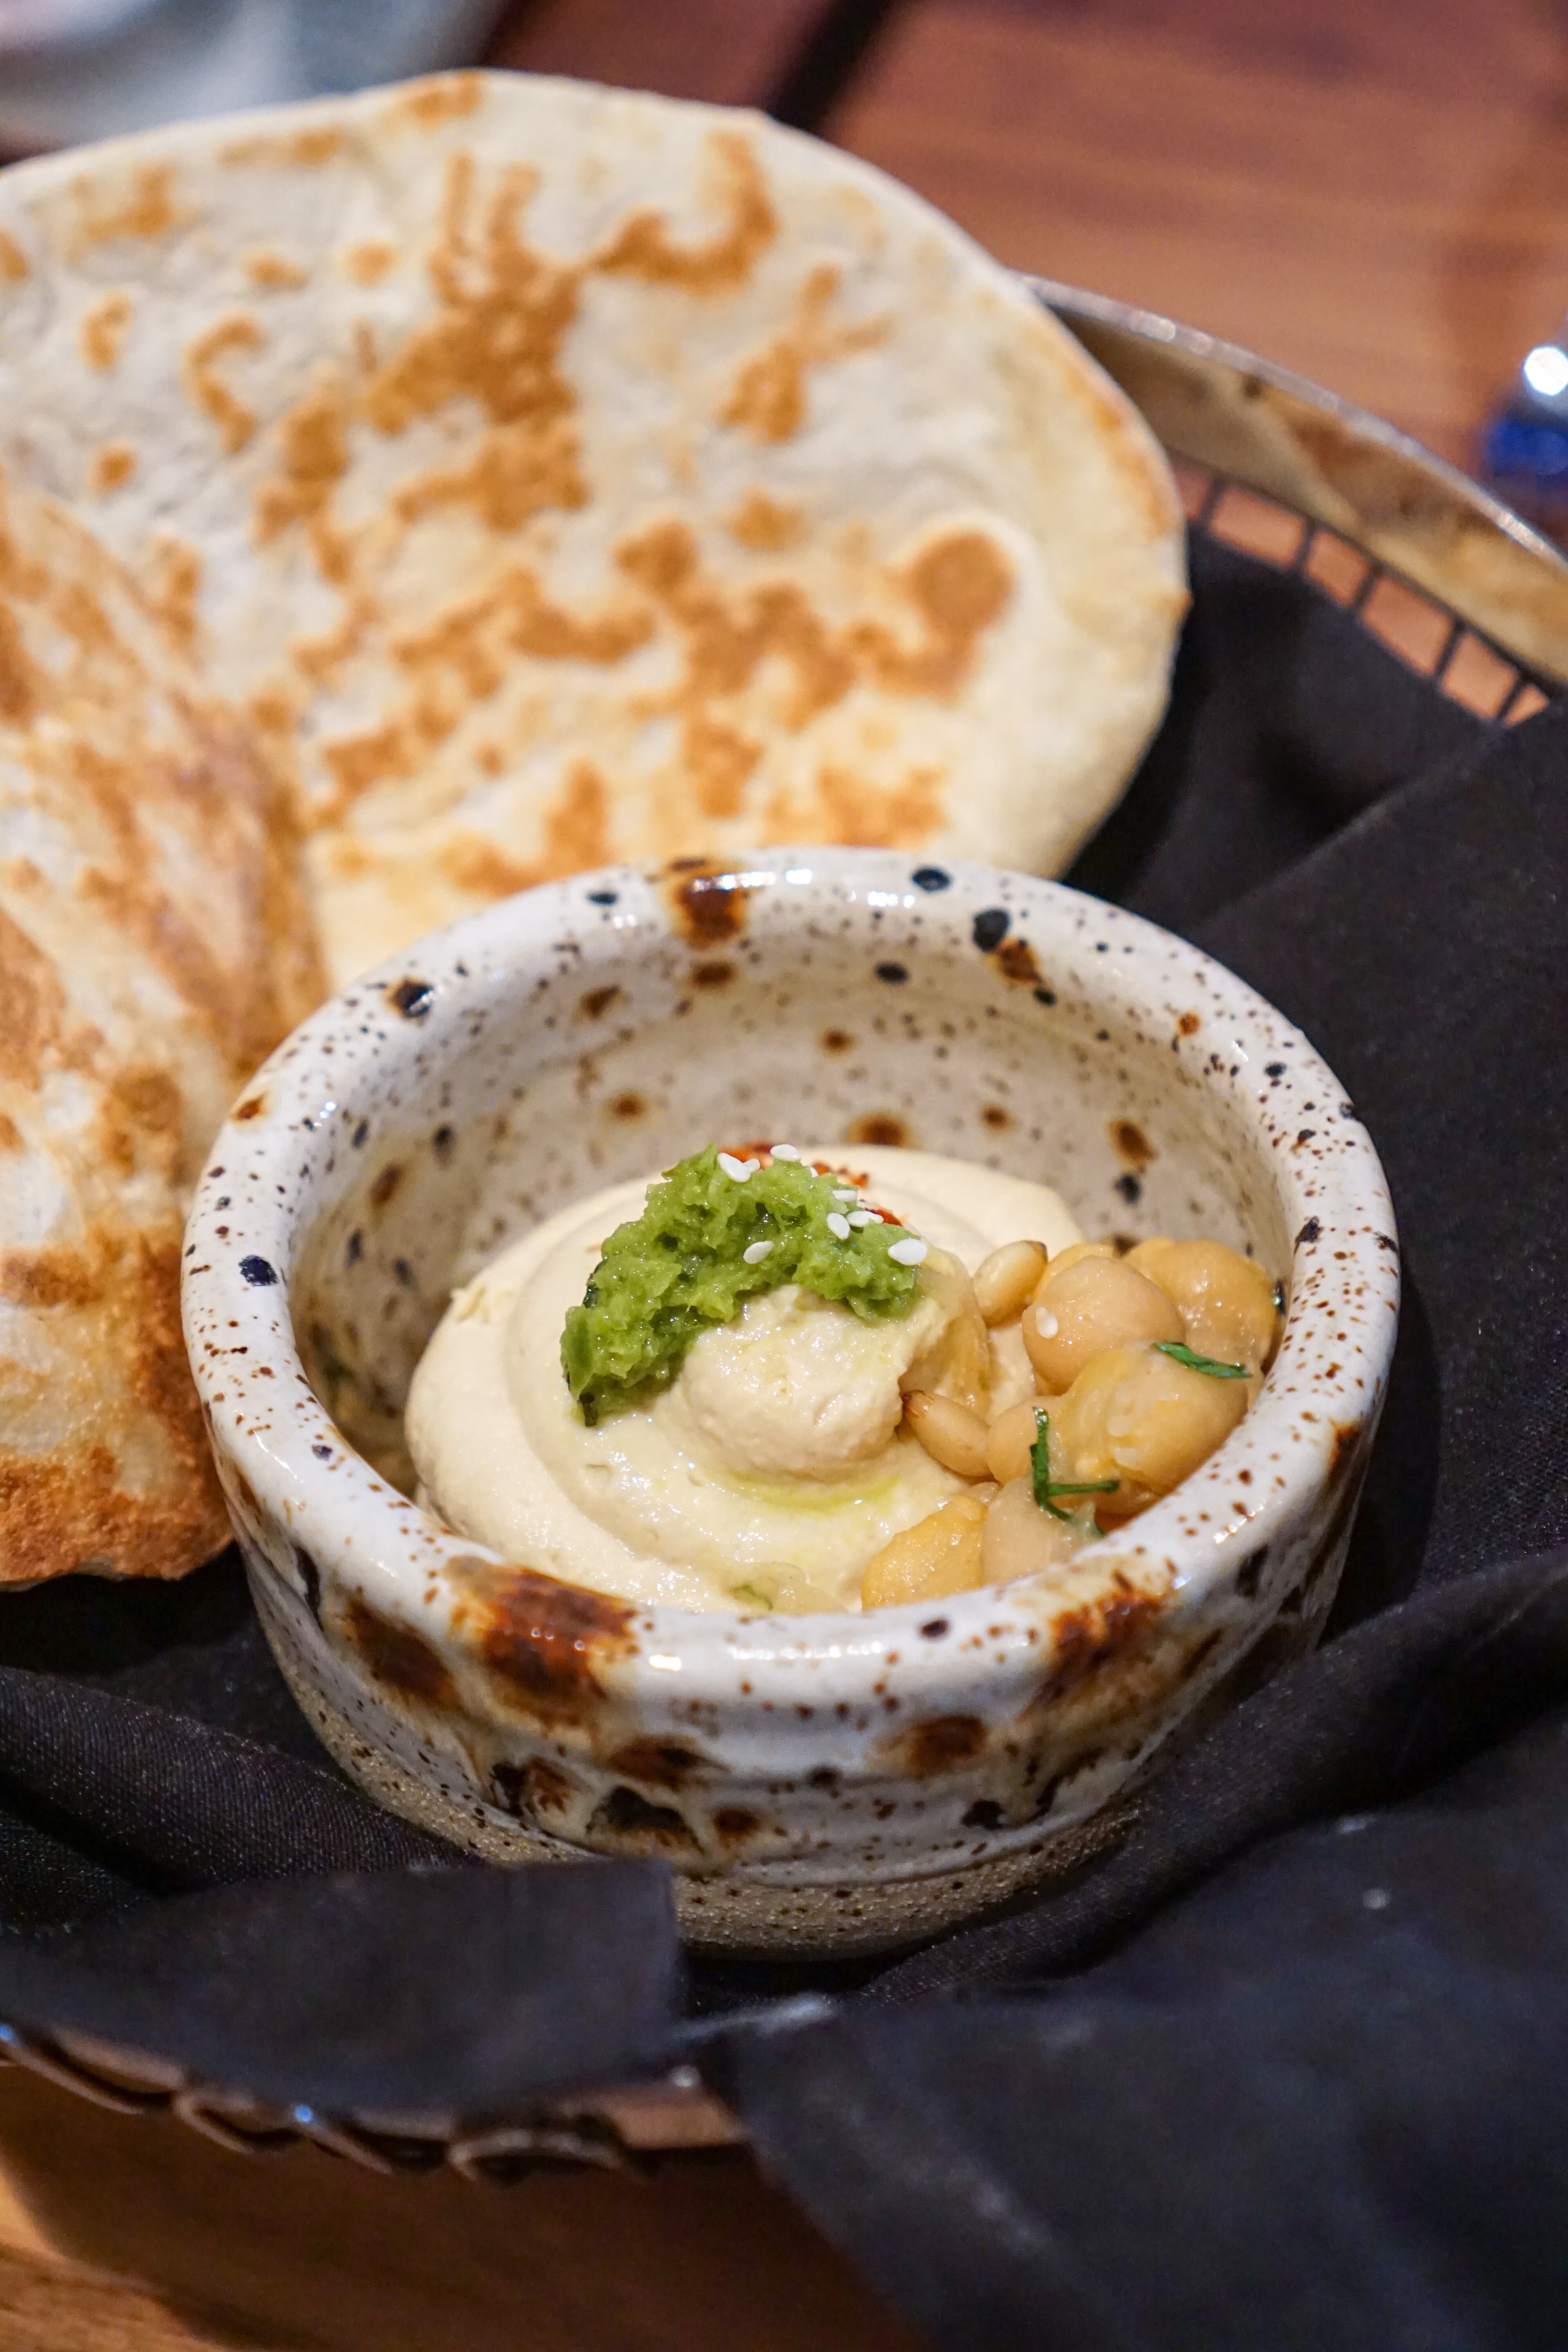 yasma tasting menu syrian-lebanese food in downtown vancouver coal harbour hummus with fresh housemade bread